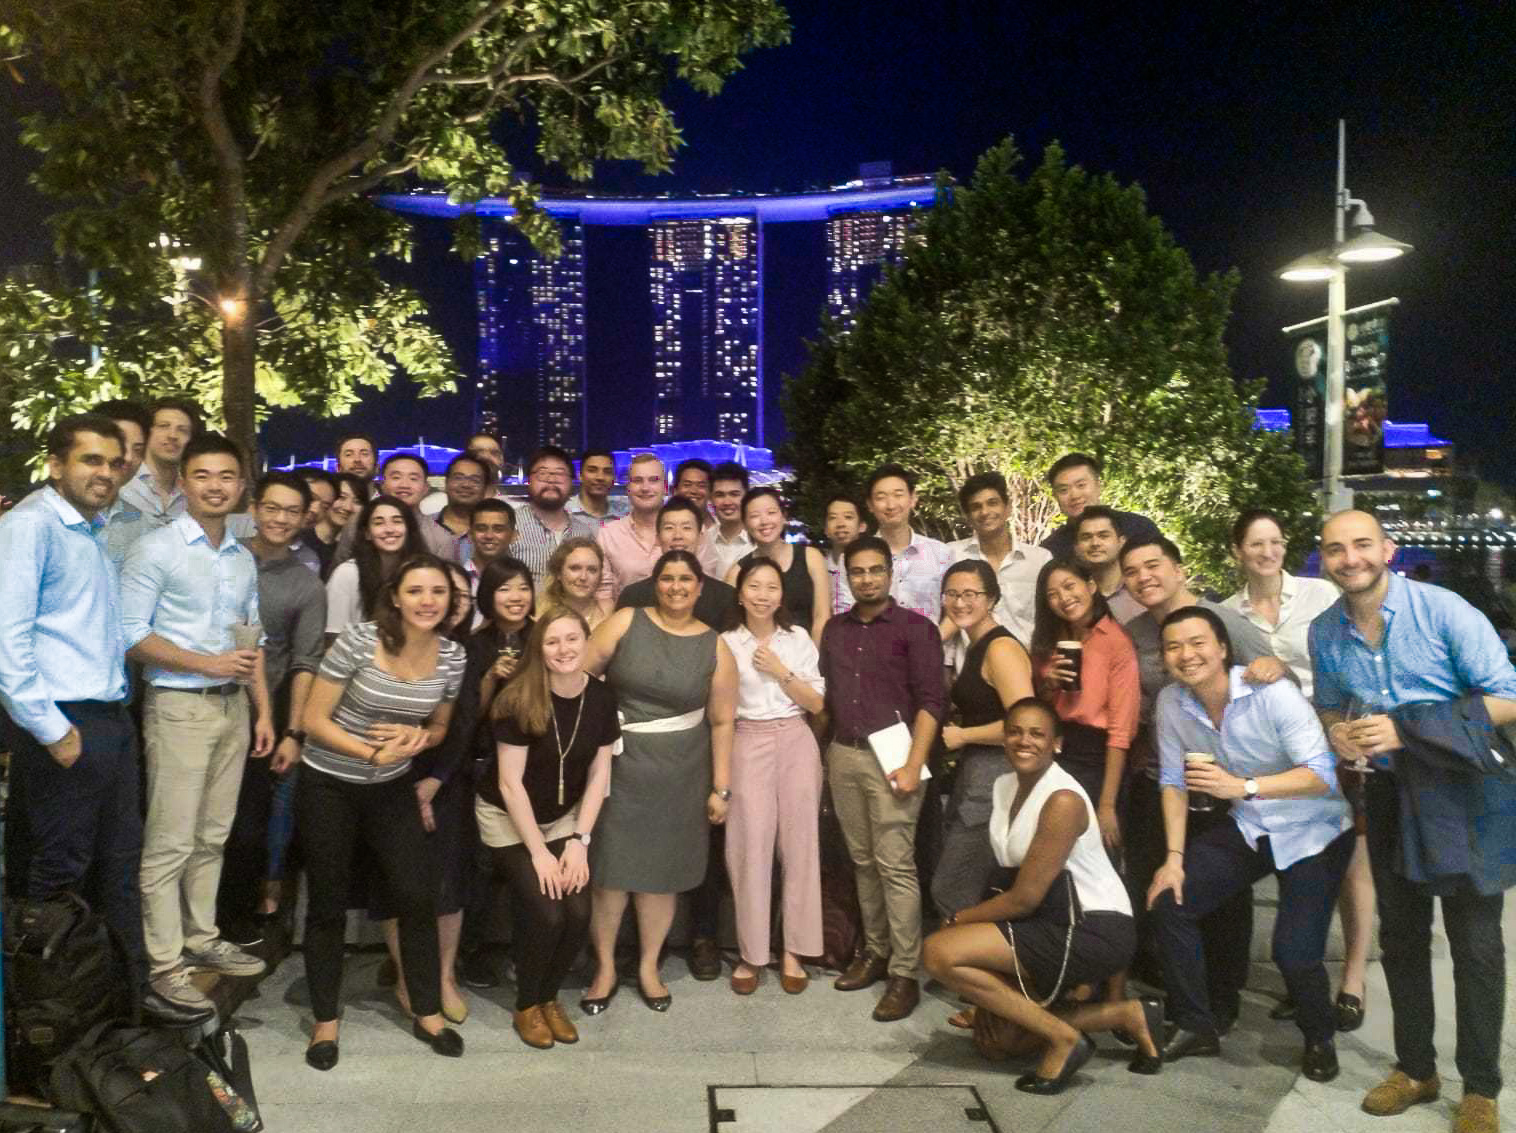 An evening networking event organized by MBA alumni living in Singapore